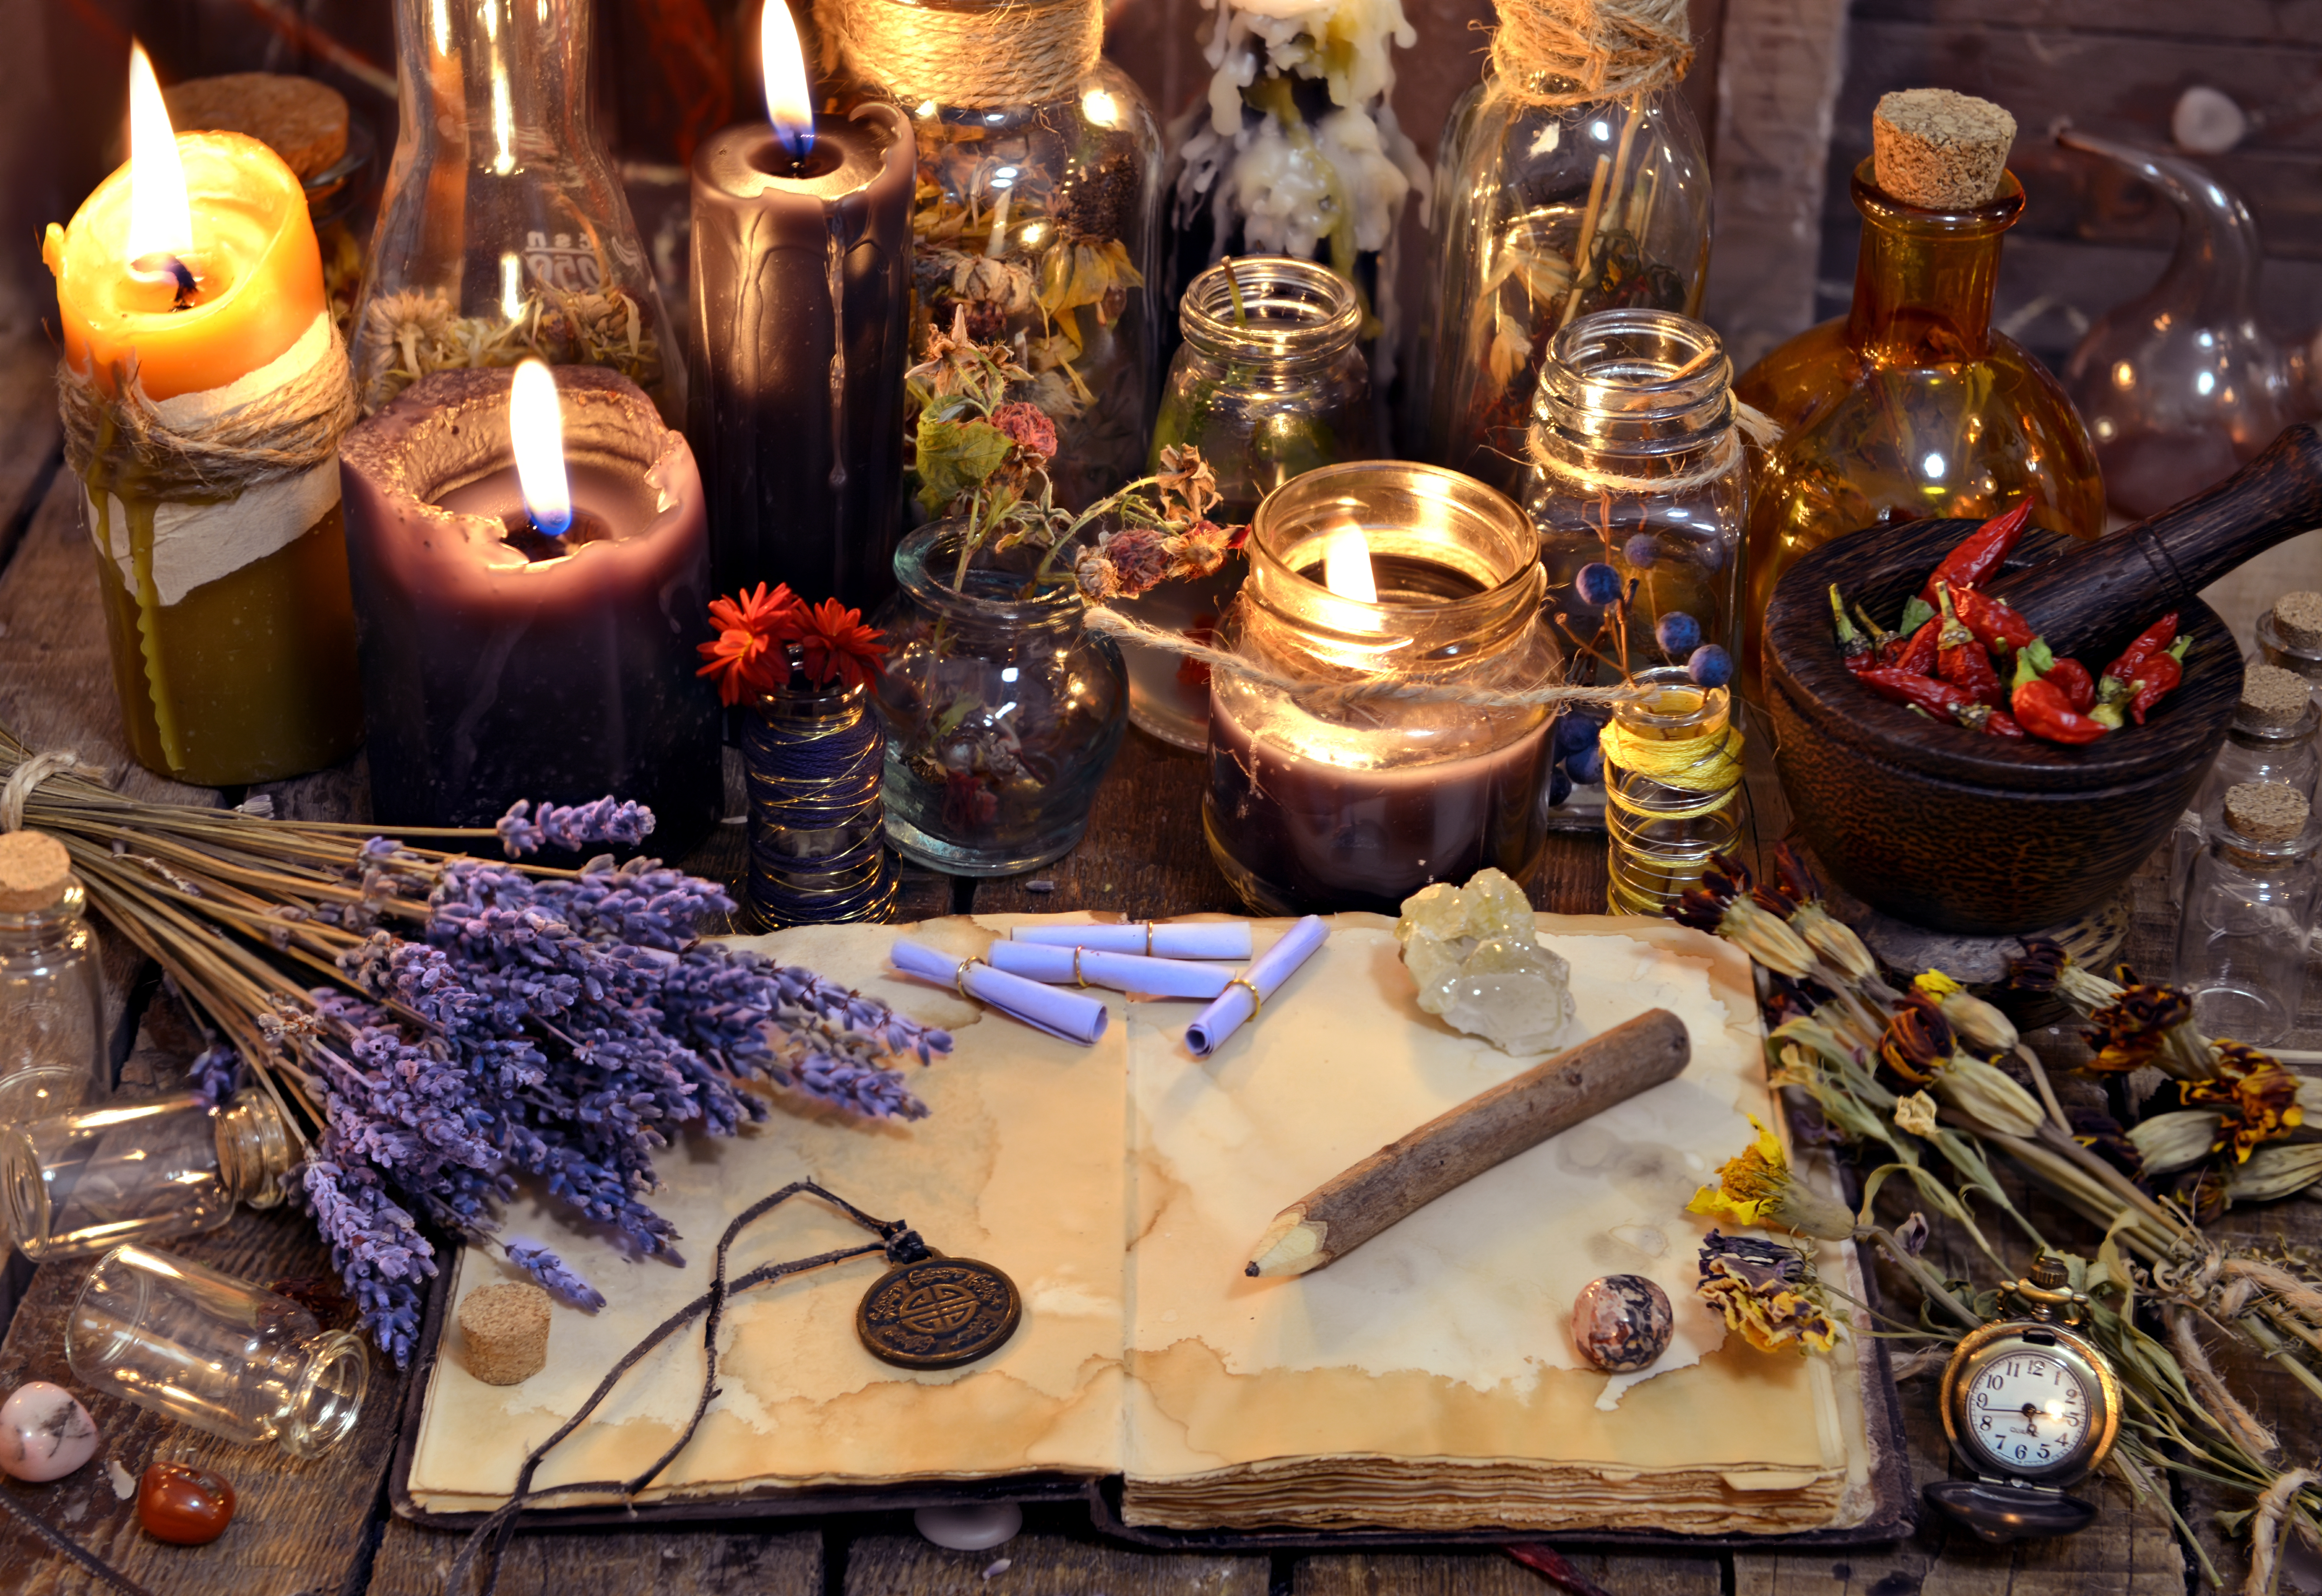 Lit candles, crystals, potions and an open book